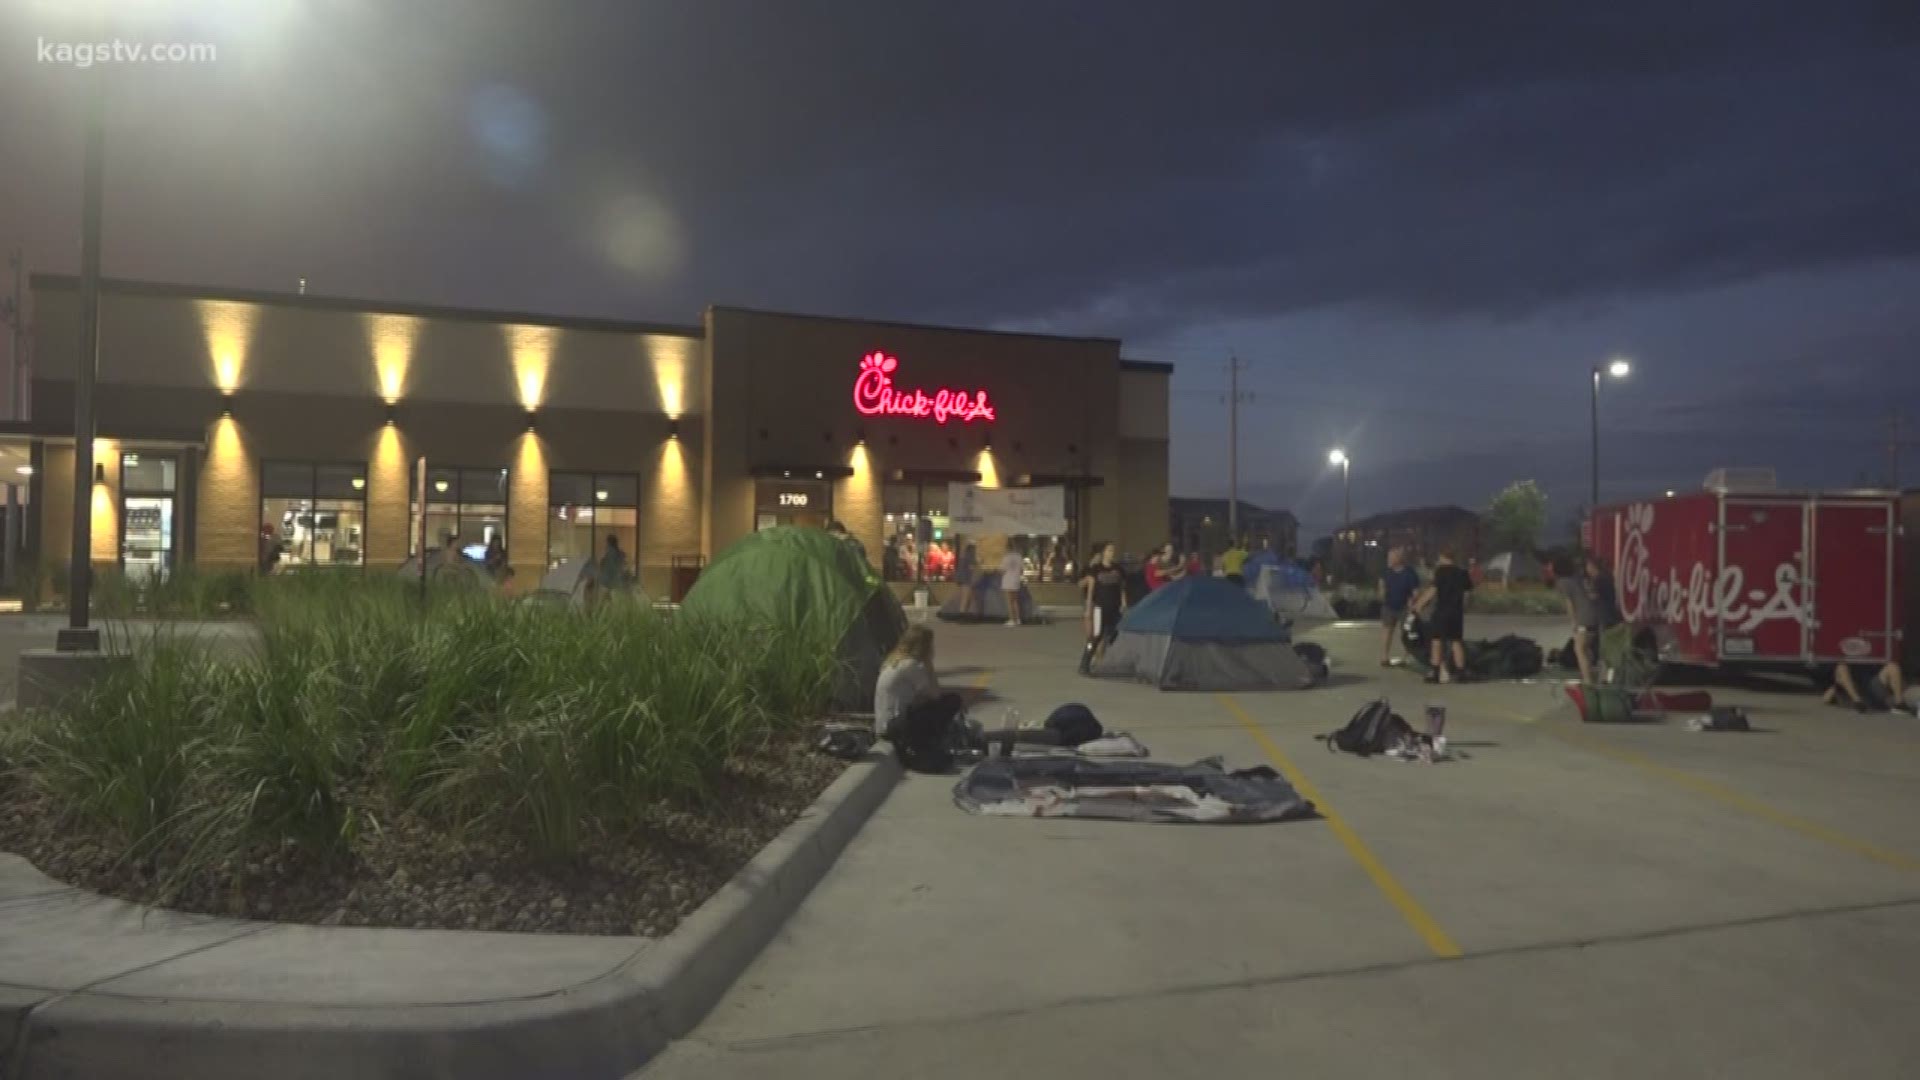 The first 100 people in line are promised Chick-Fil-A for a year.